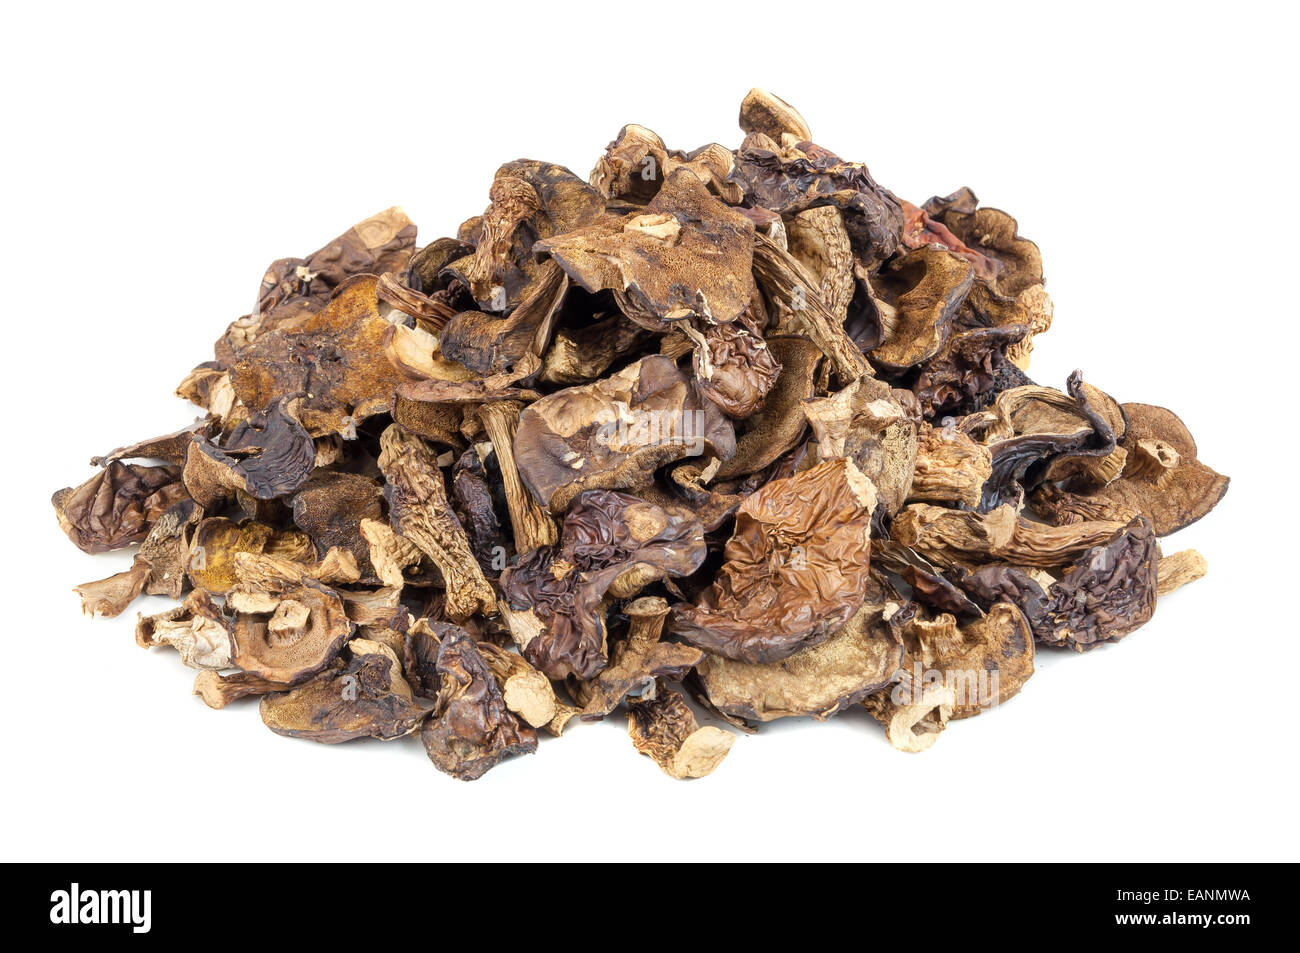 Heap of dried mushrooms isolated on white background with clipping path Stock Photo